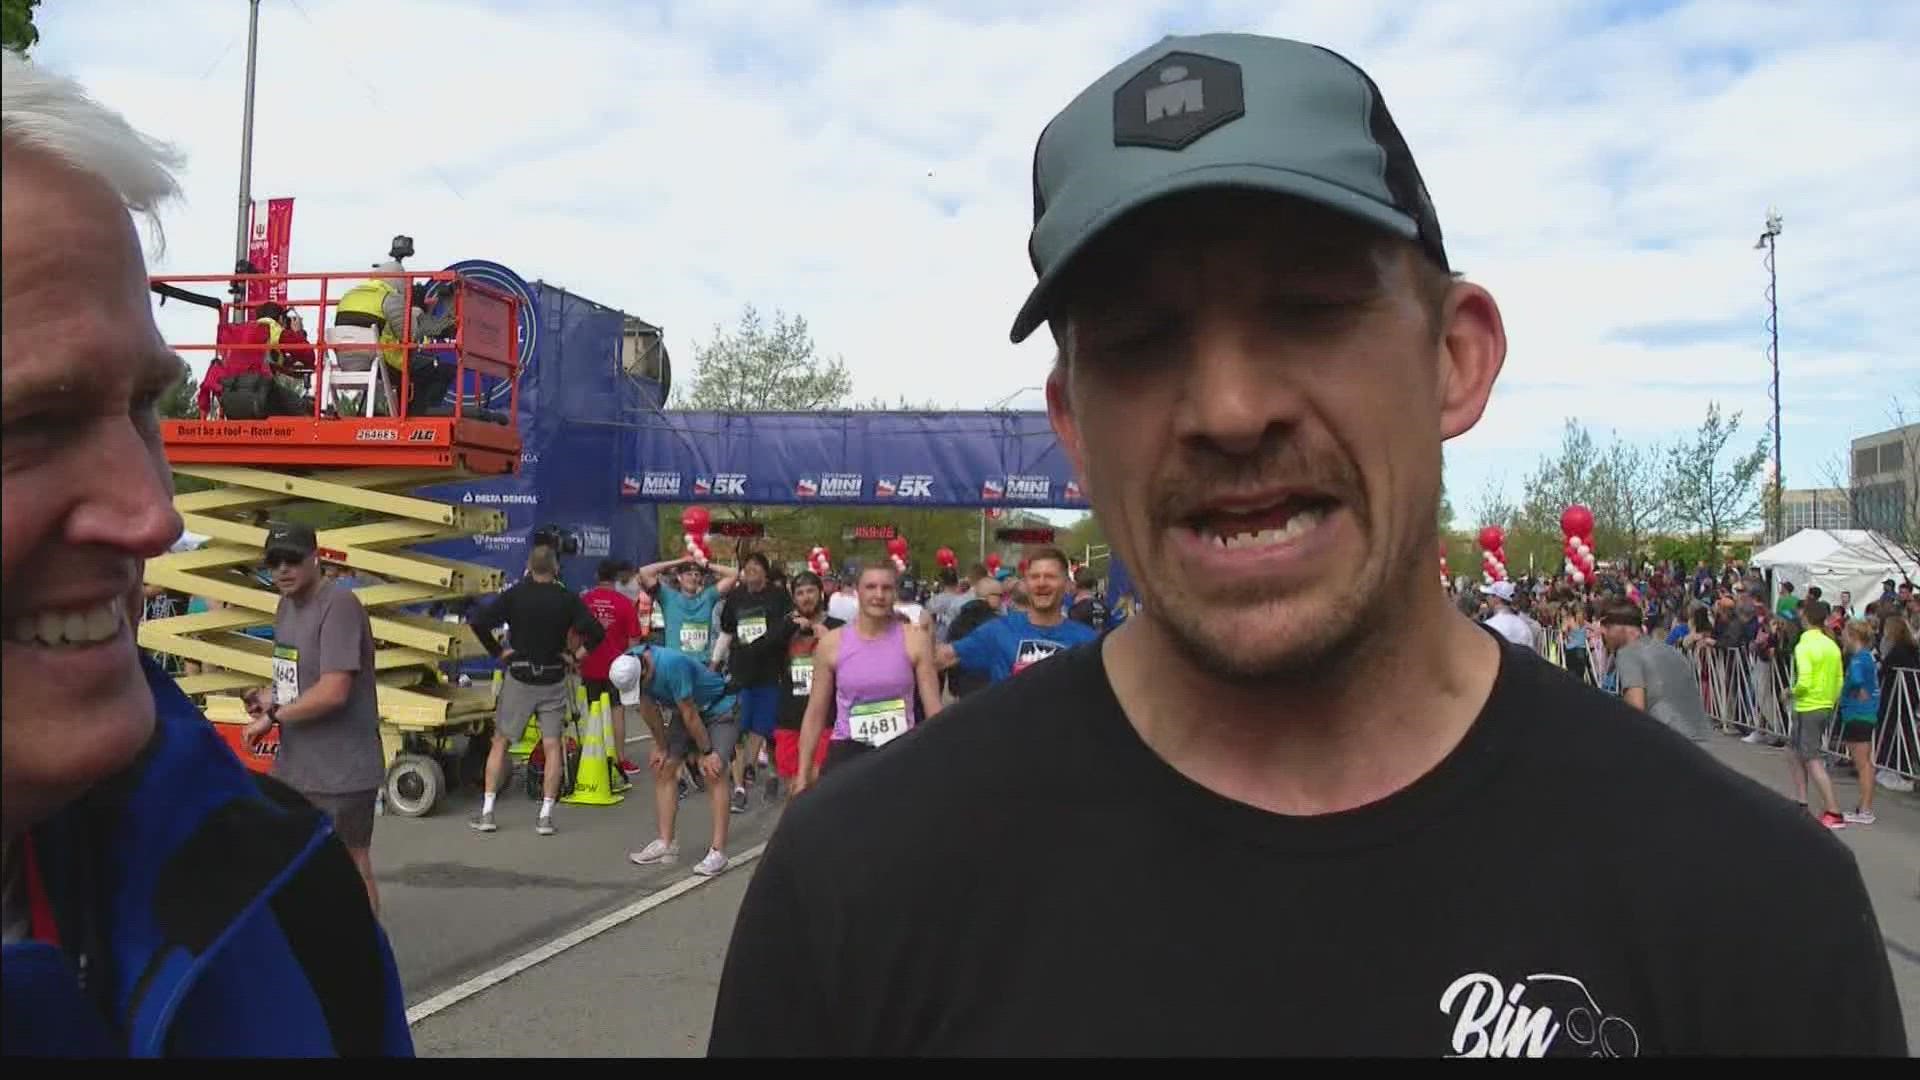 The ex-tight end used the 500 Festival Mini-Marathon to help train for Ironman competition.